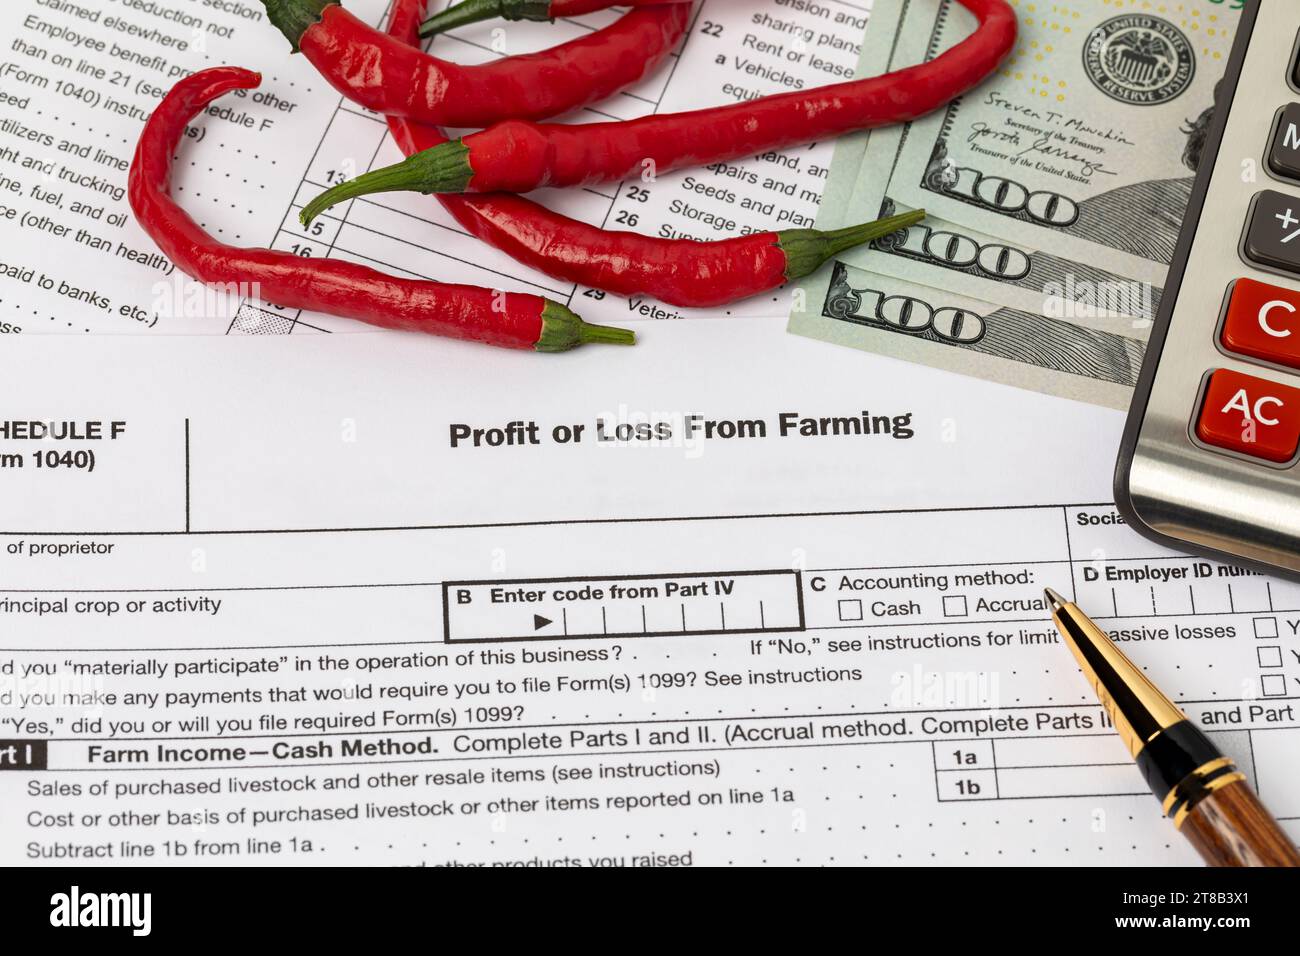 Hot pepper and farming profit or loss tax form with calculator. Vegetable and fruit farm income, finances and management concept. Stock Photo